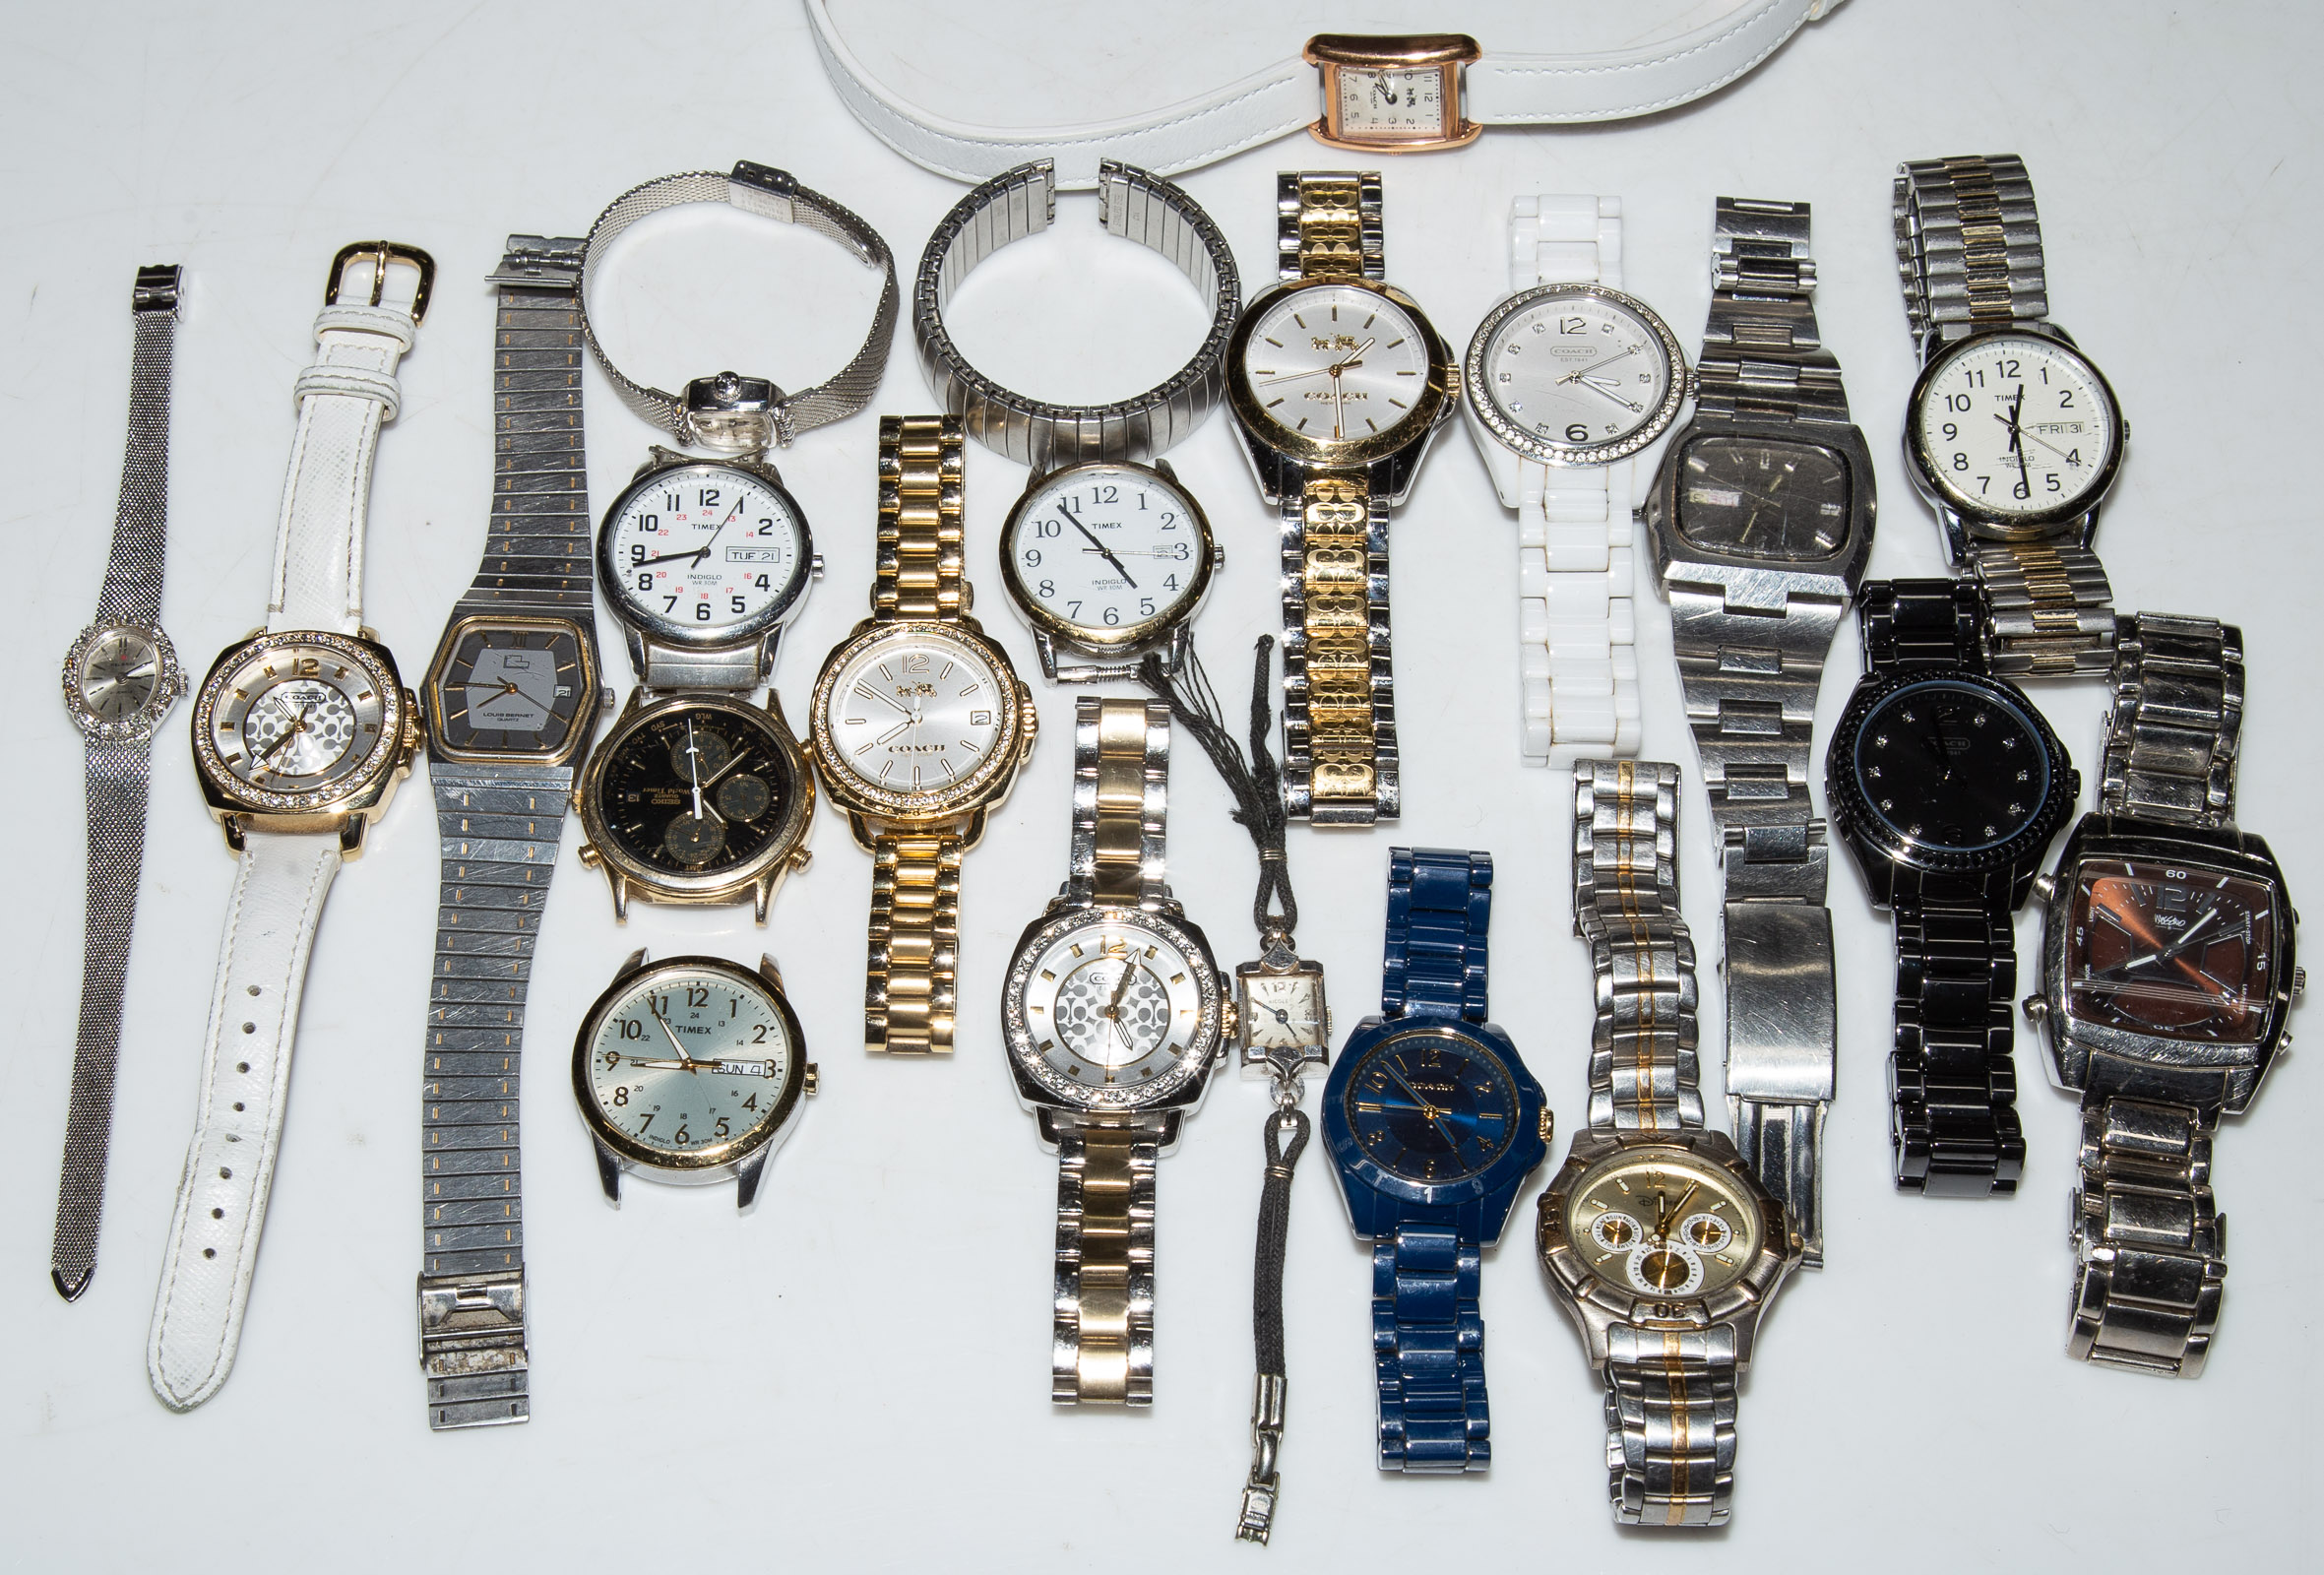 A LARGE COLLECTION OF FASHION WATCHES